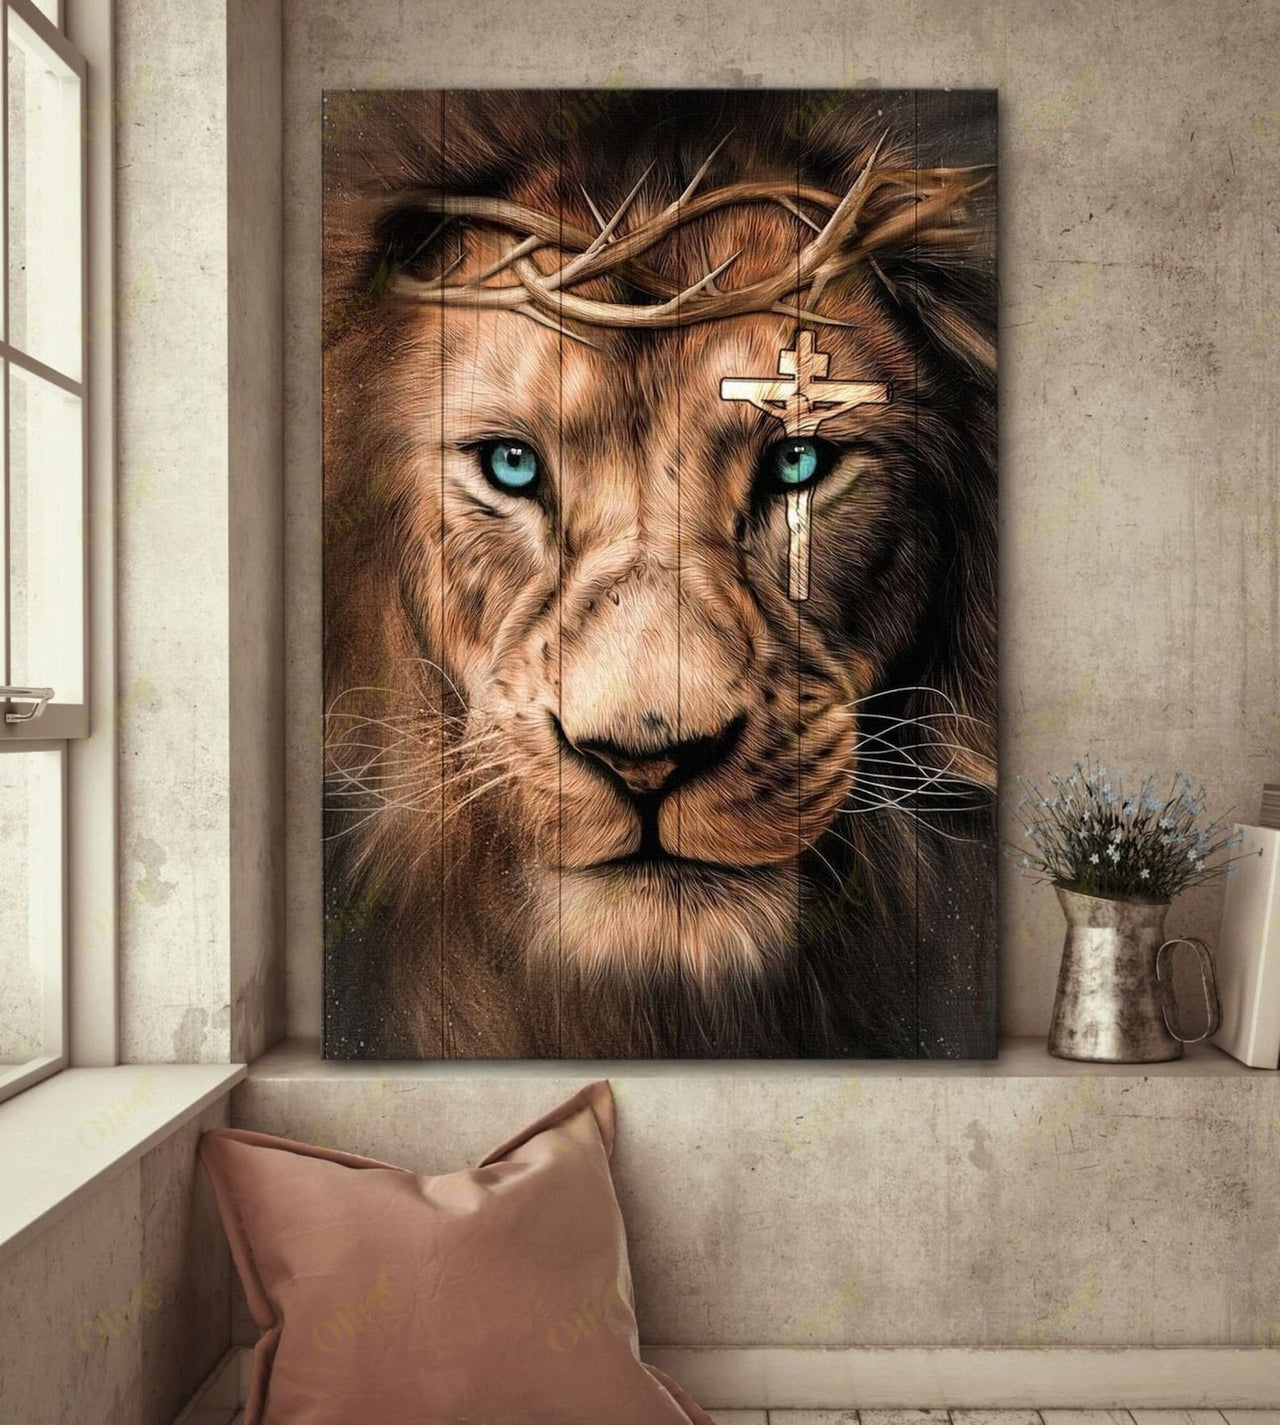 Christian Awesome Jesus Lion And Cross On His Eye Wall Art Decor Poster Canvas